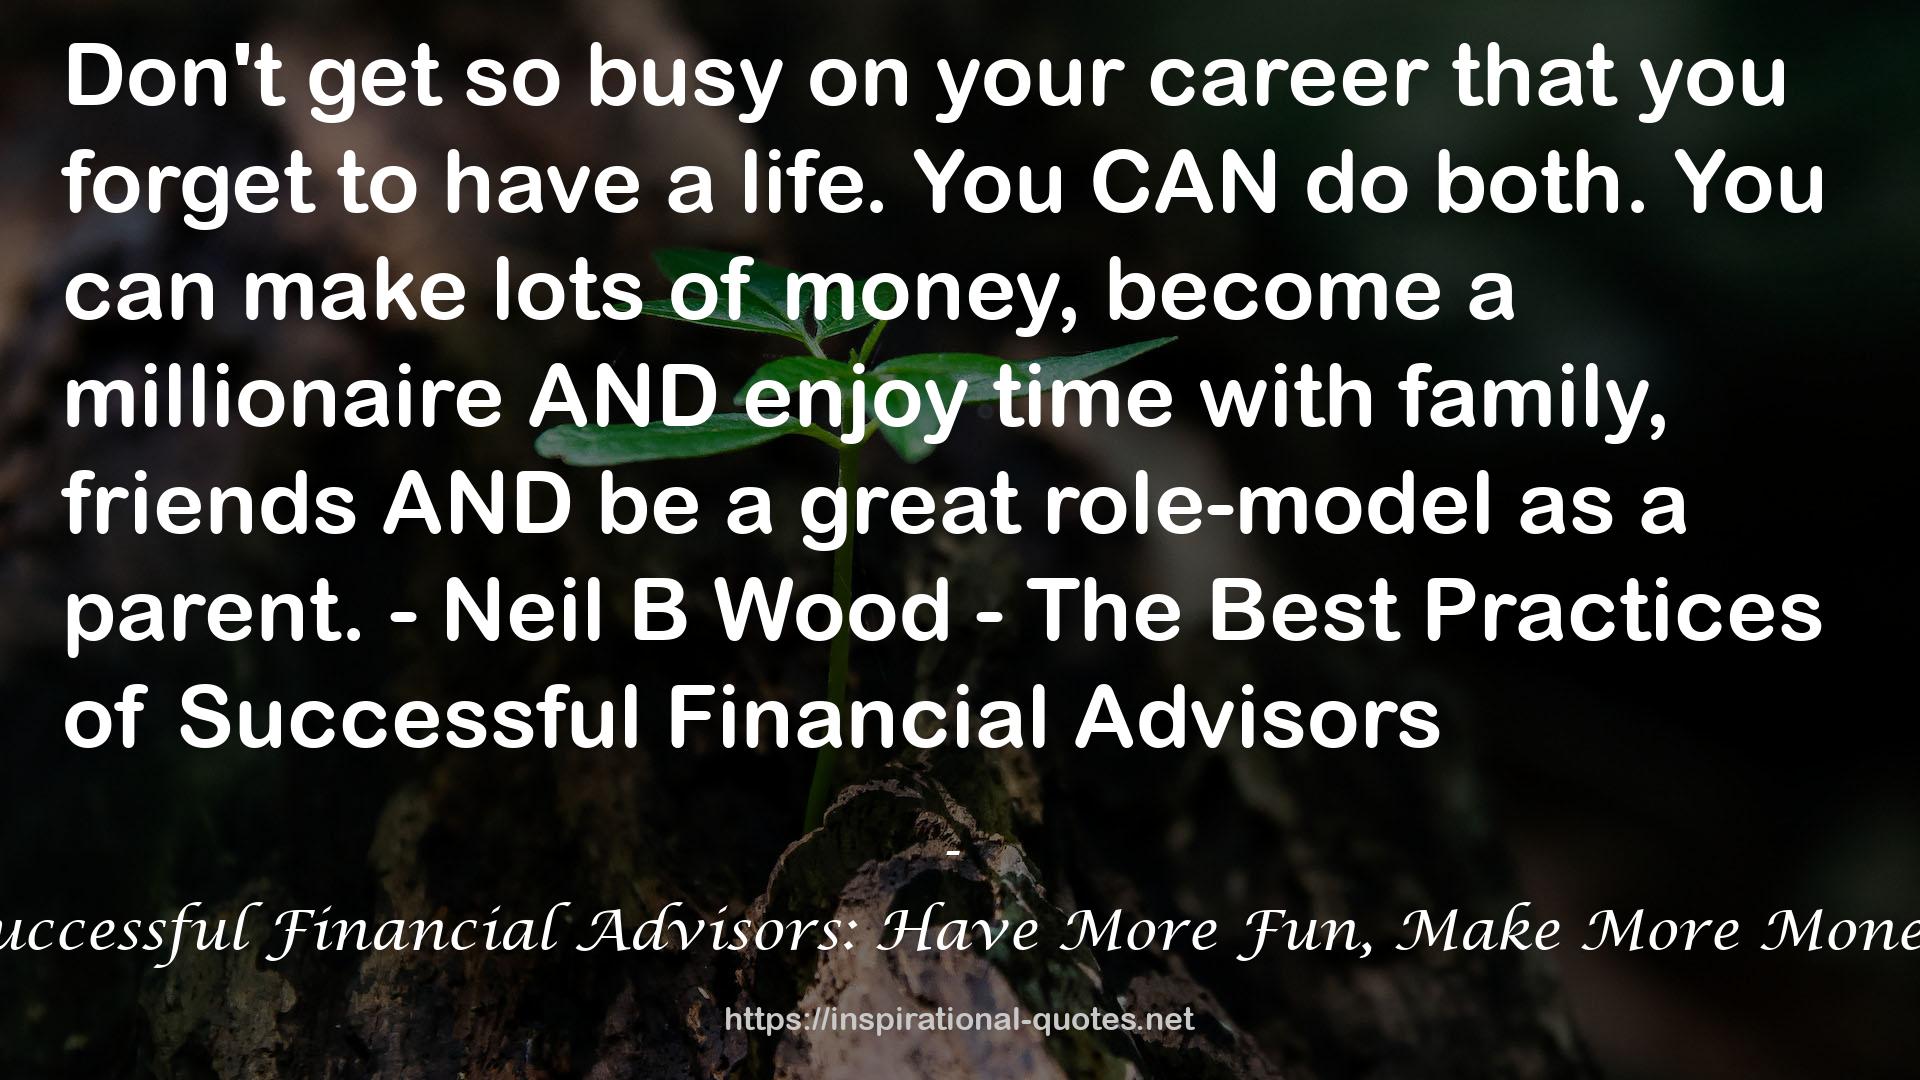 The Best Practices Of Successful Financial Advisors: Have More Fun, Make More Money, and Find More Time QUOTES